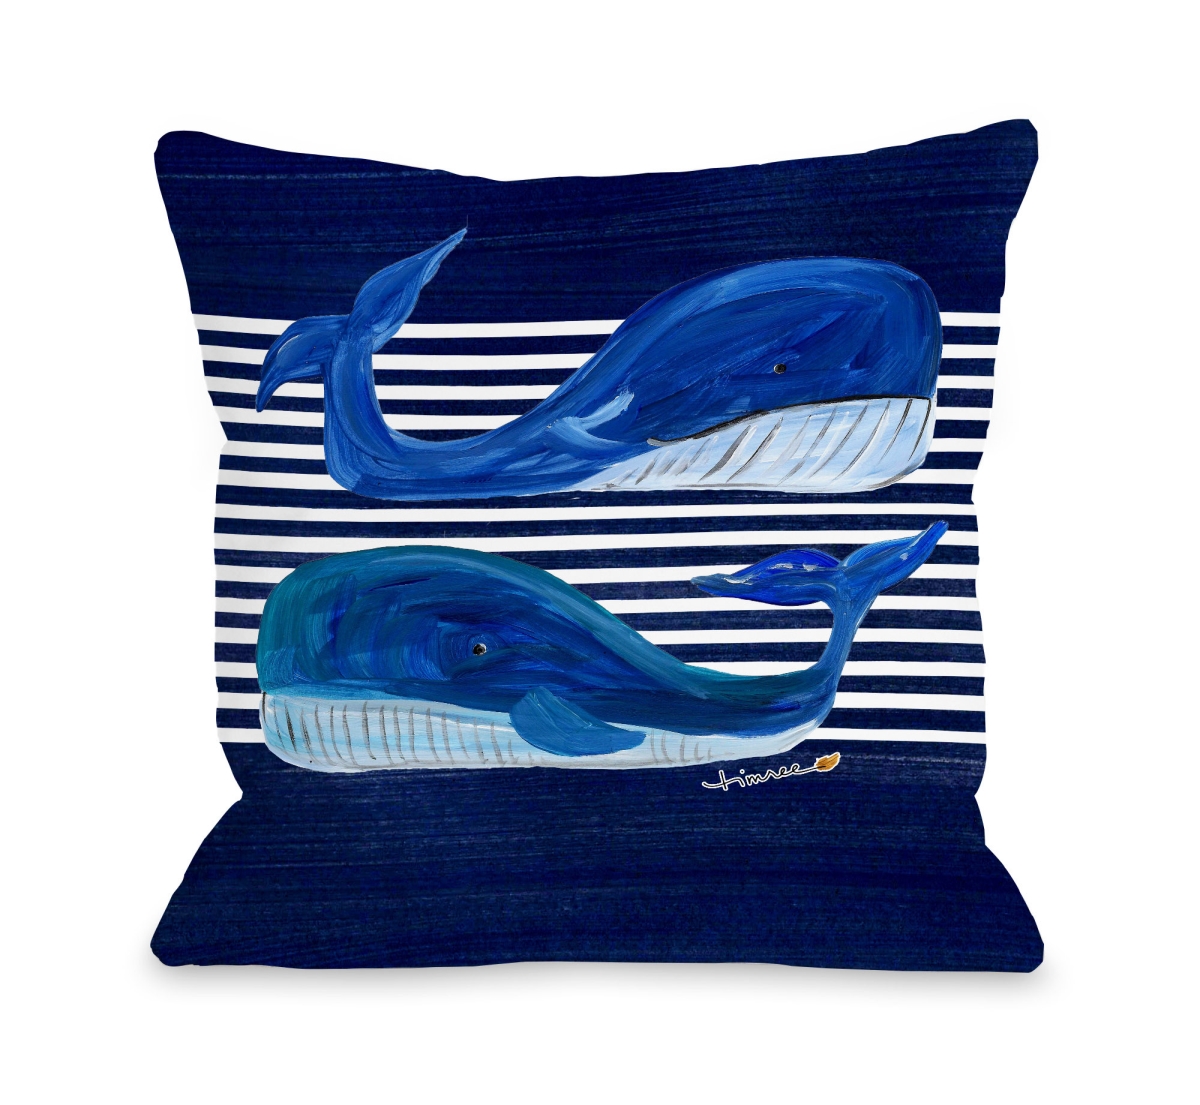 16 X 16 In. Whale Buddies Pillow By Timree, Navy